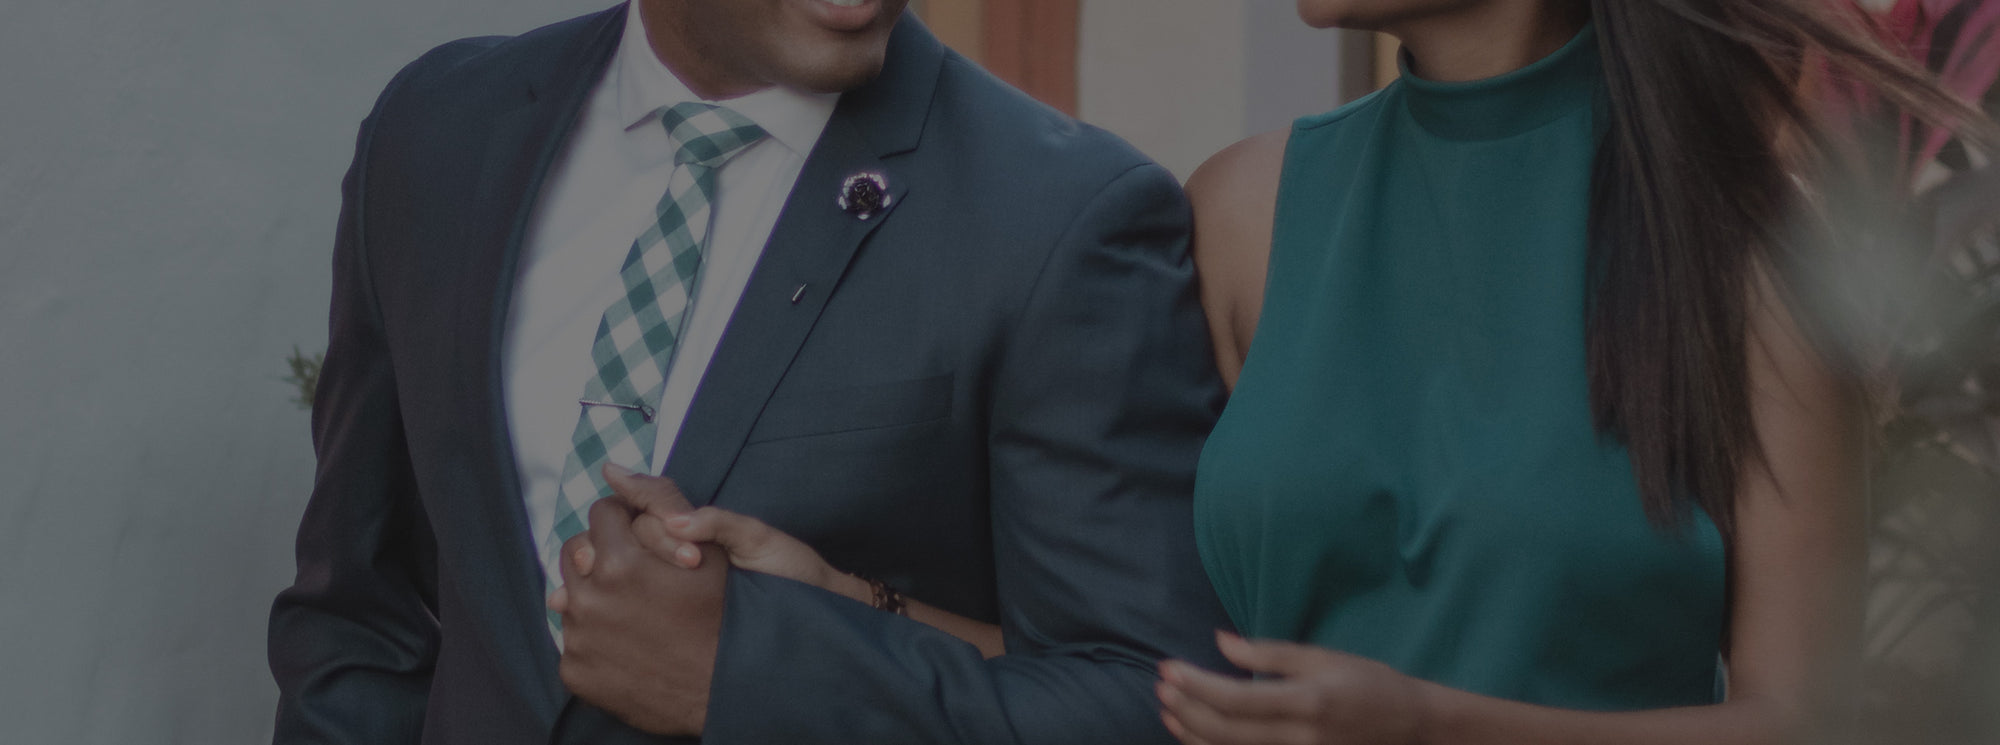 Man and woman holding hands dressed in a suit and tie